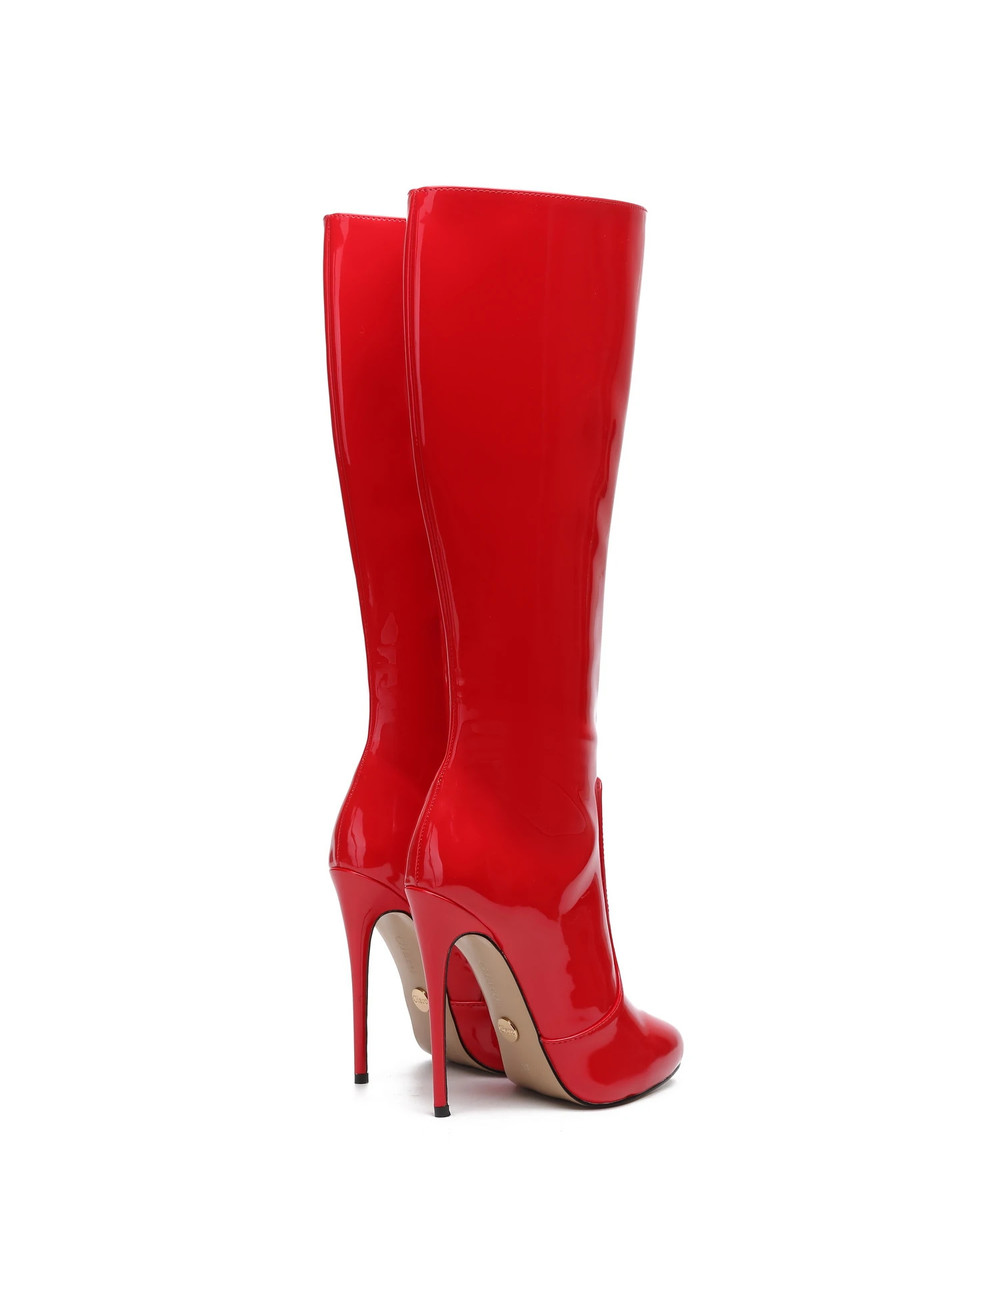 Giaro BRANDY RED SHINY KNEE BOOTS - Giaro High Heels | Official store ...